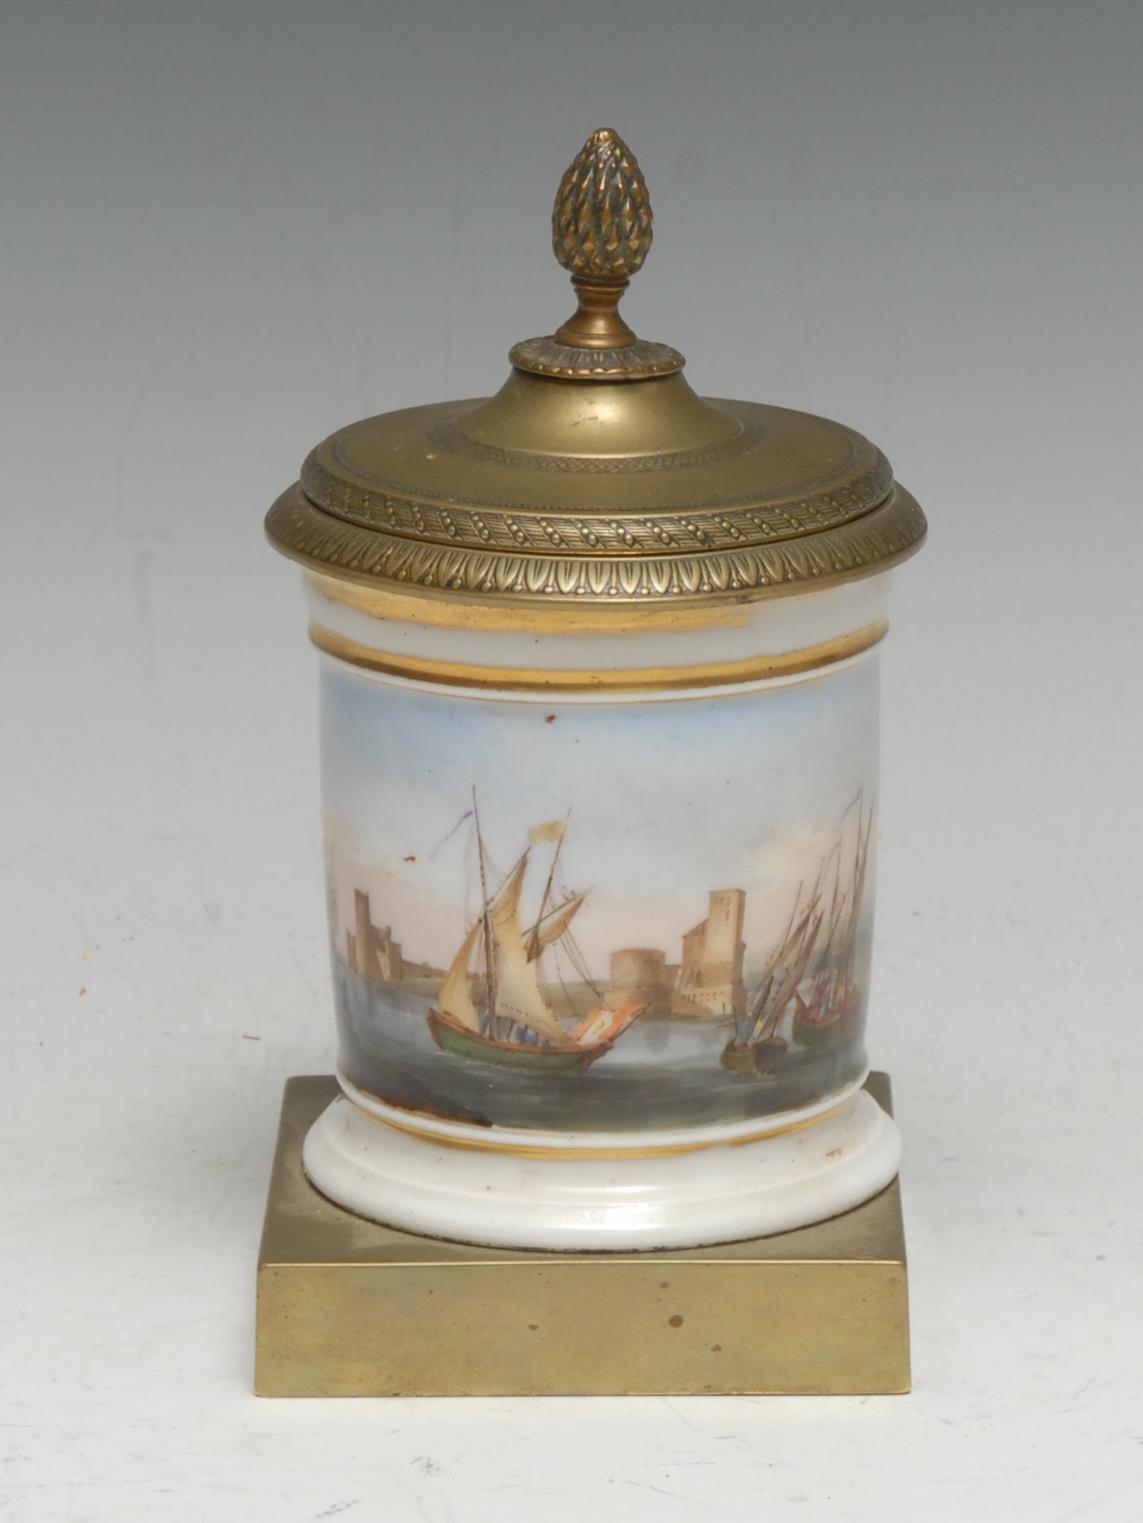 A French Empire porcelain and brass desk inkwell, painted with a maritime scene, the cover with pine